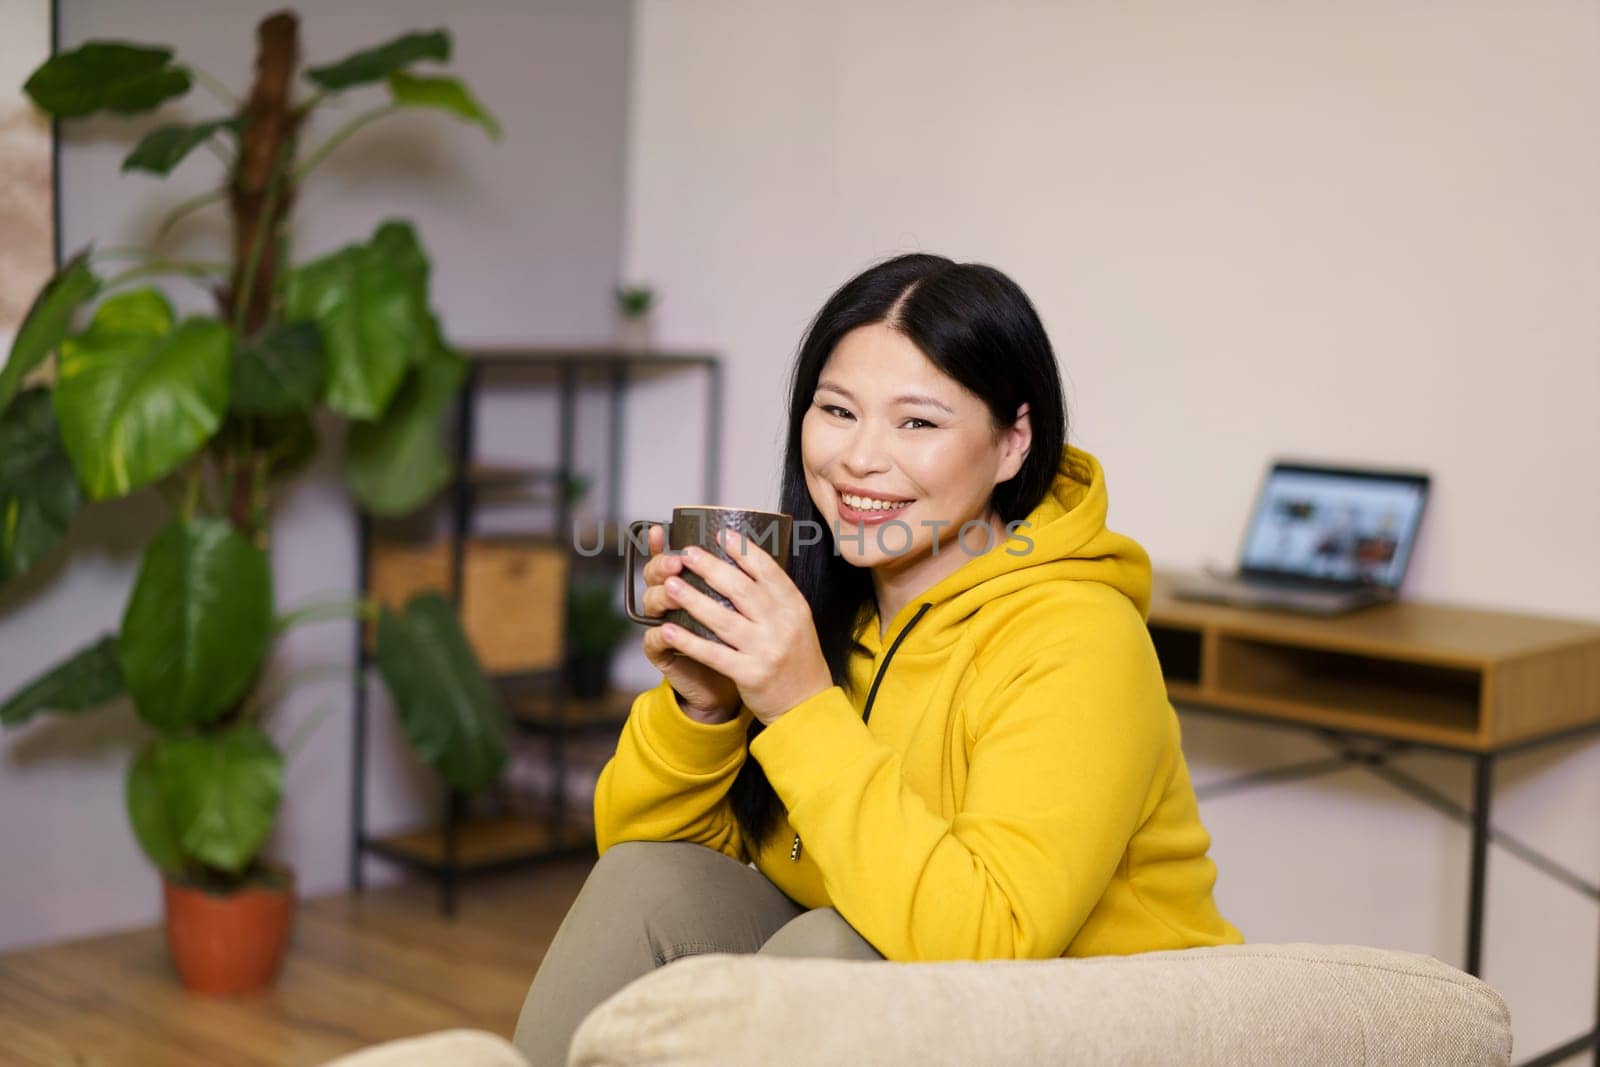 Cute Asian woman takes break from her online work at home to enjoy a soothing cup of tea. The image captures the balance of work and leisure in her comfortable indoor space, surrounded by the calm and serenity of nature. by LipikStockMedia